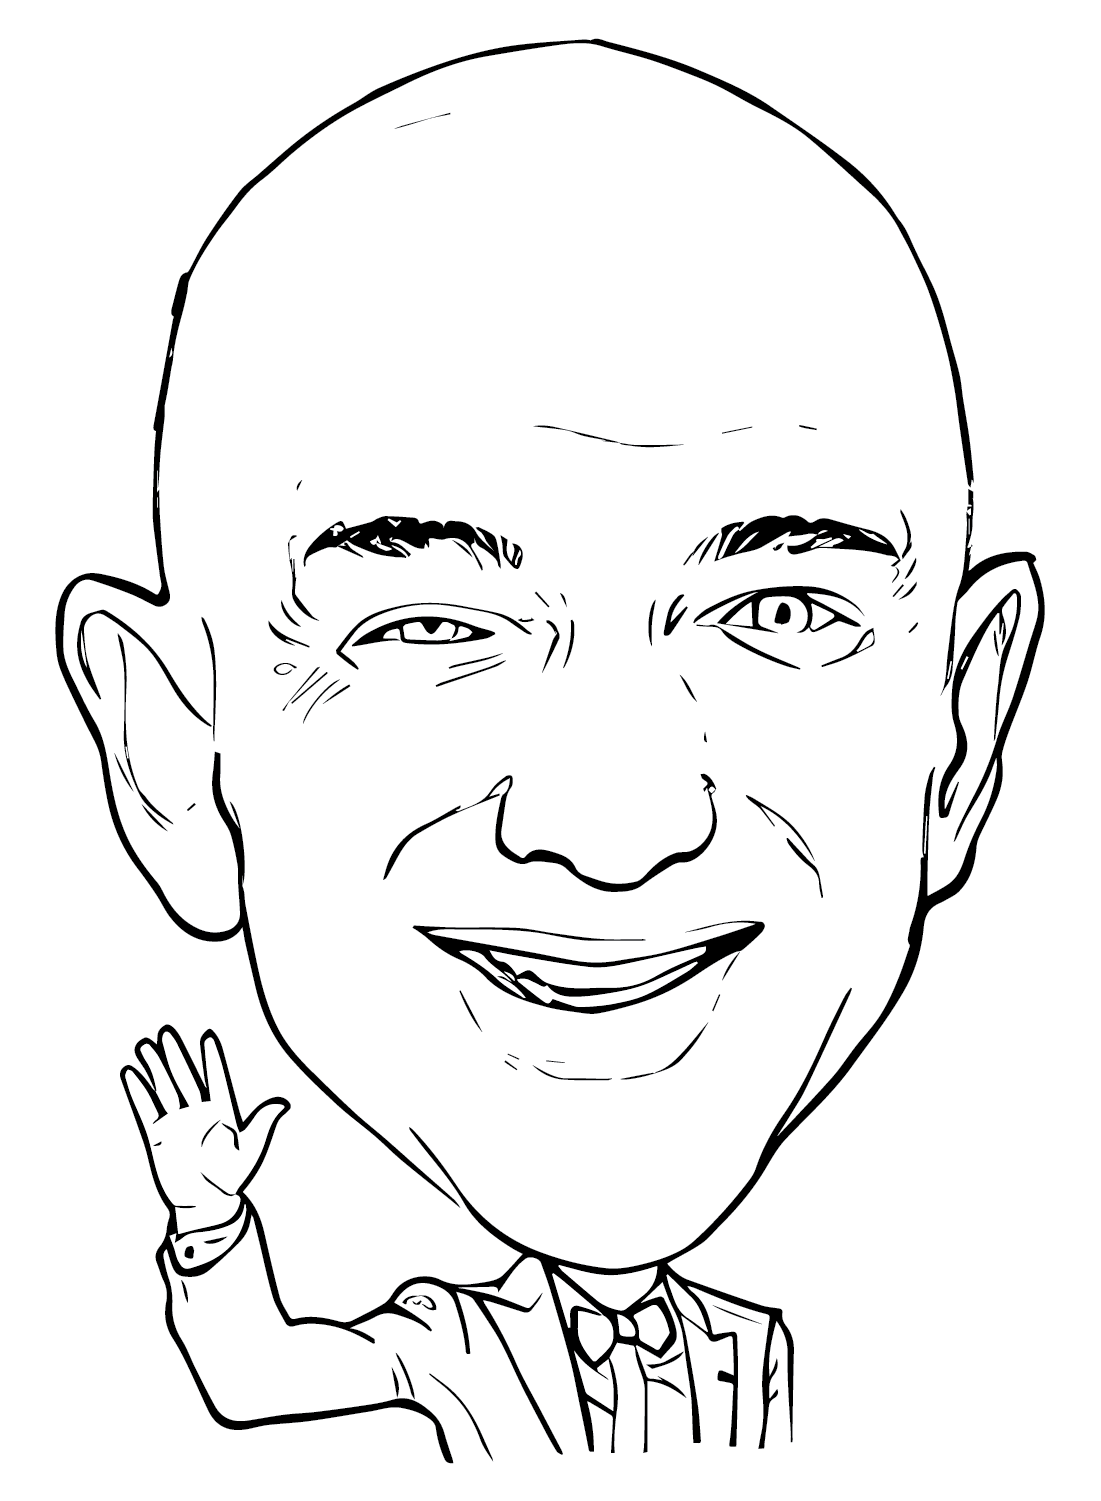 Jeff Bezos Caricatures Coloring Page